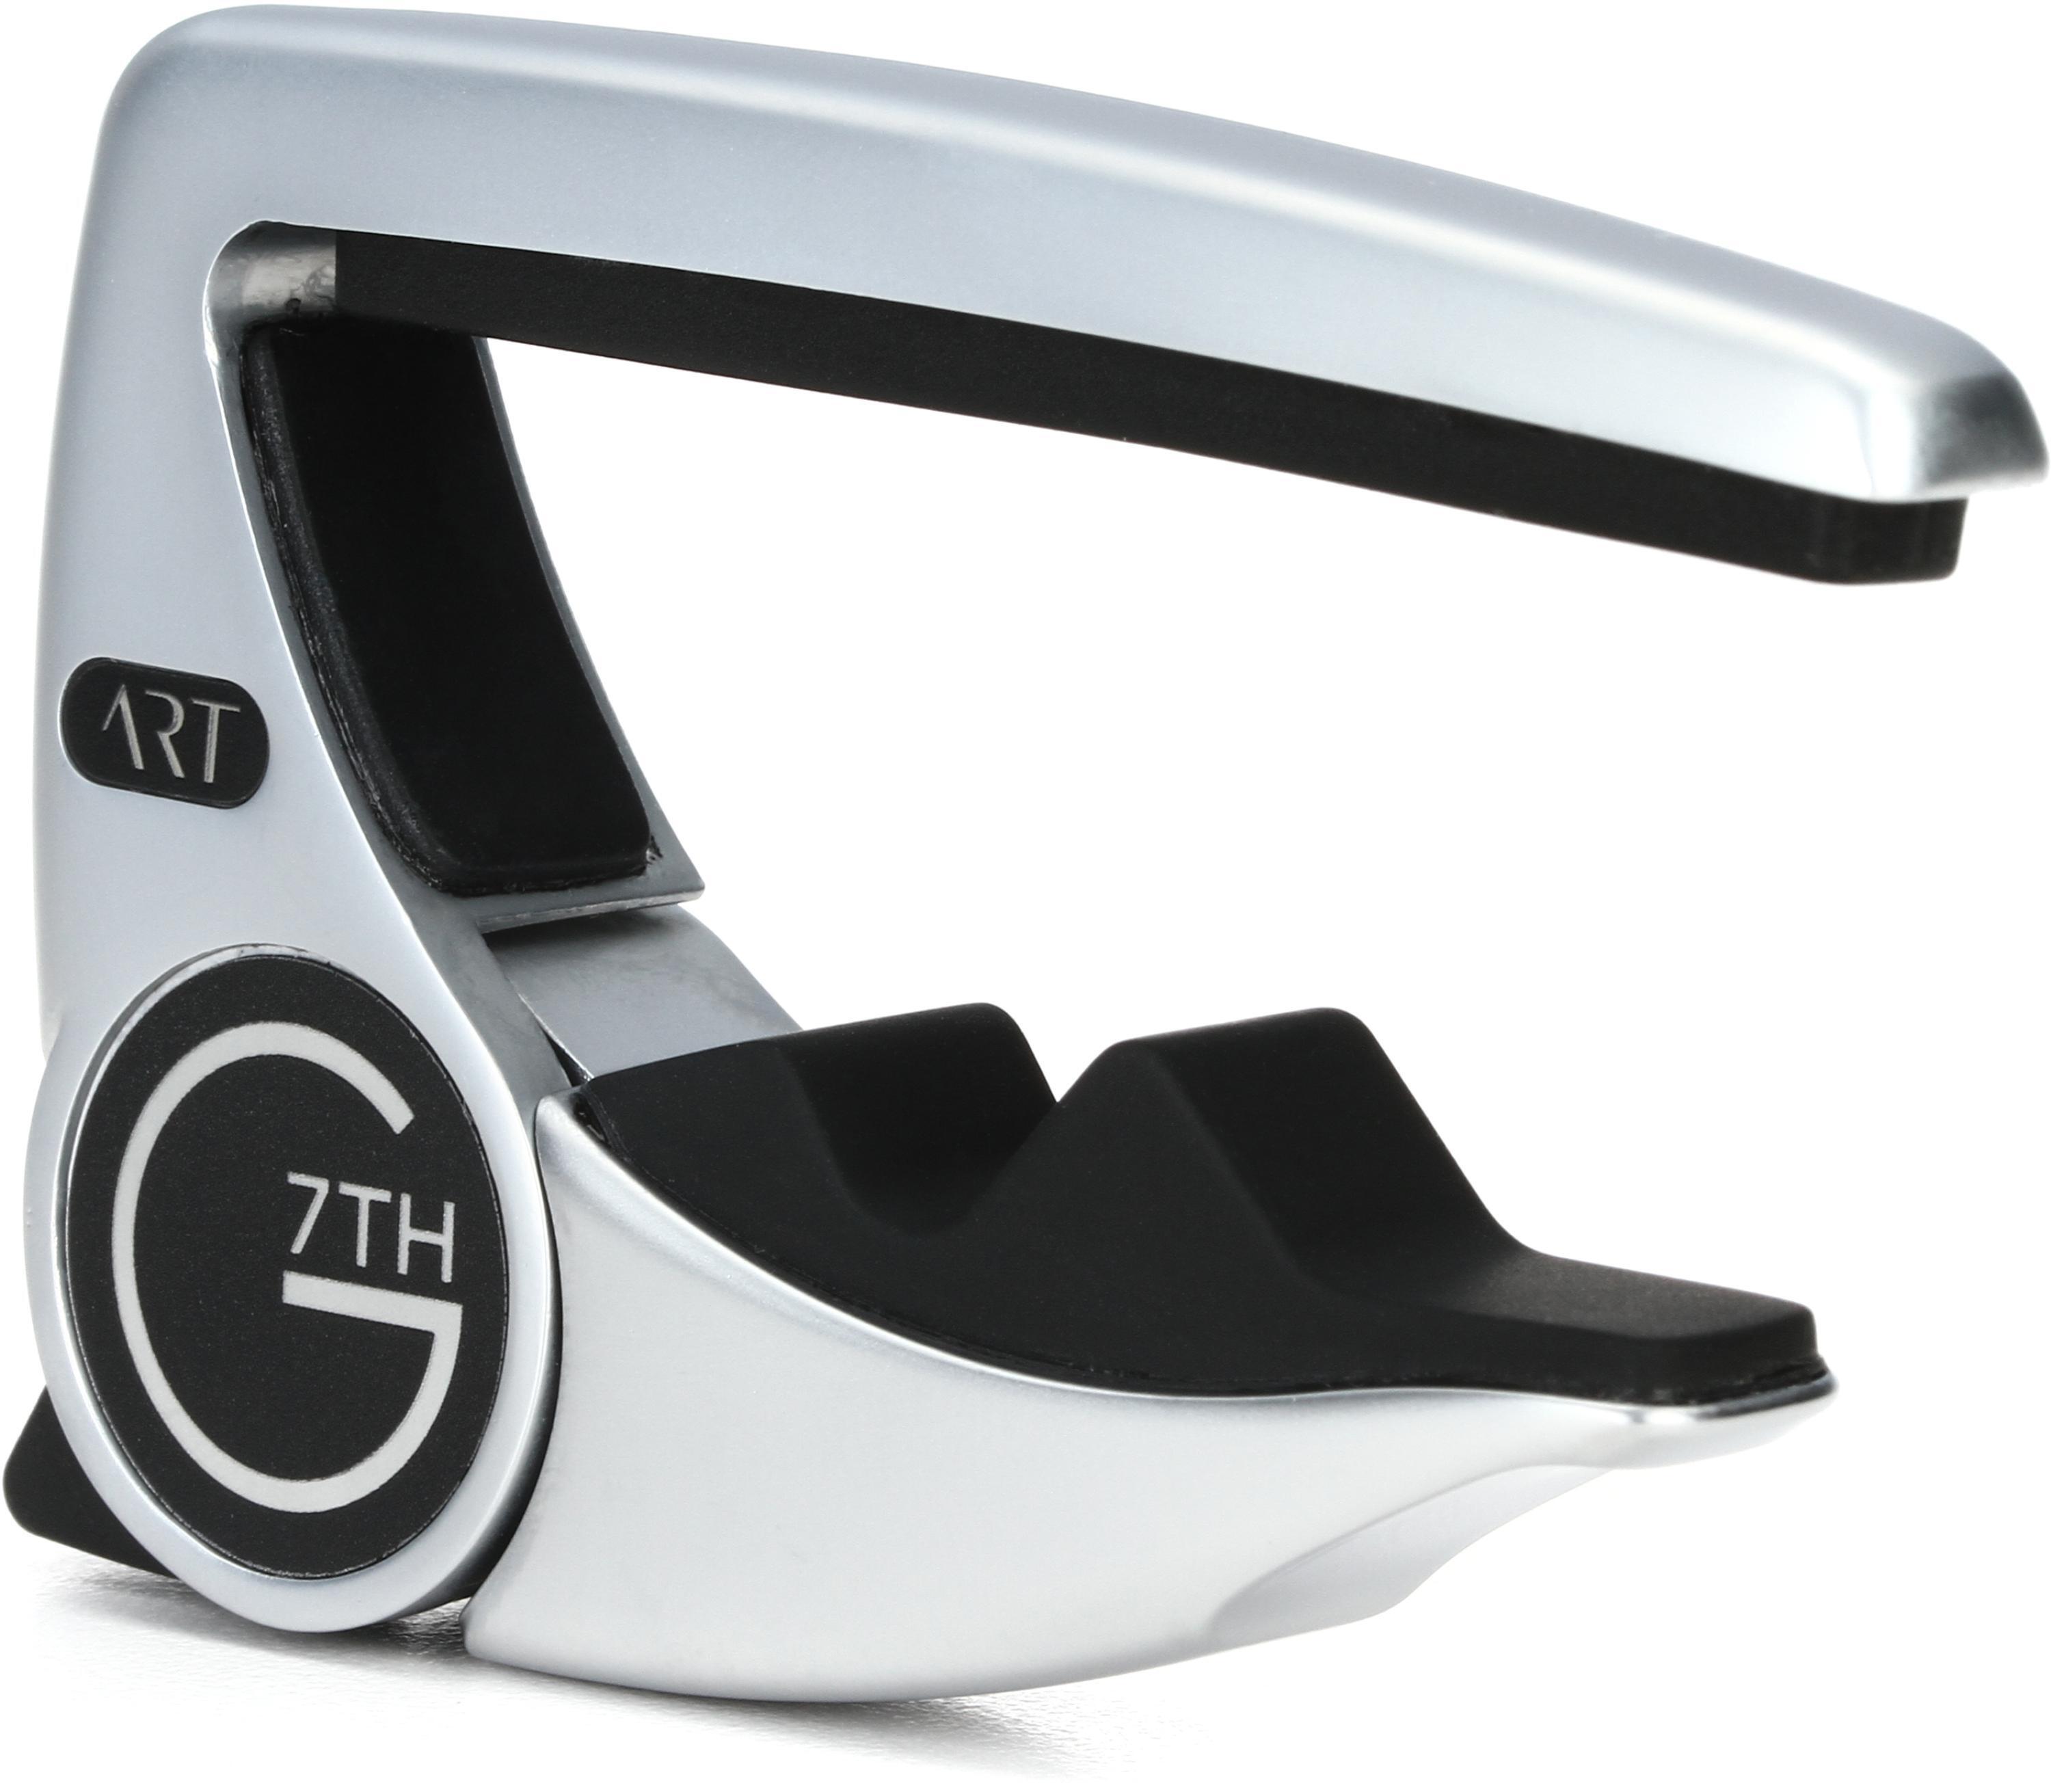 G7th, The Capo Company-G7th Performance 3 guitar capo for acoustic and  electric guitars (Steel String Silver)